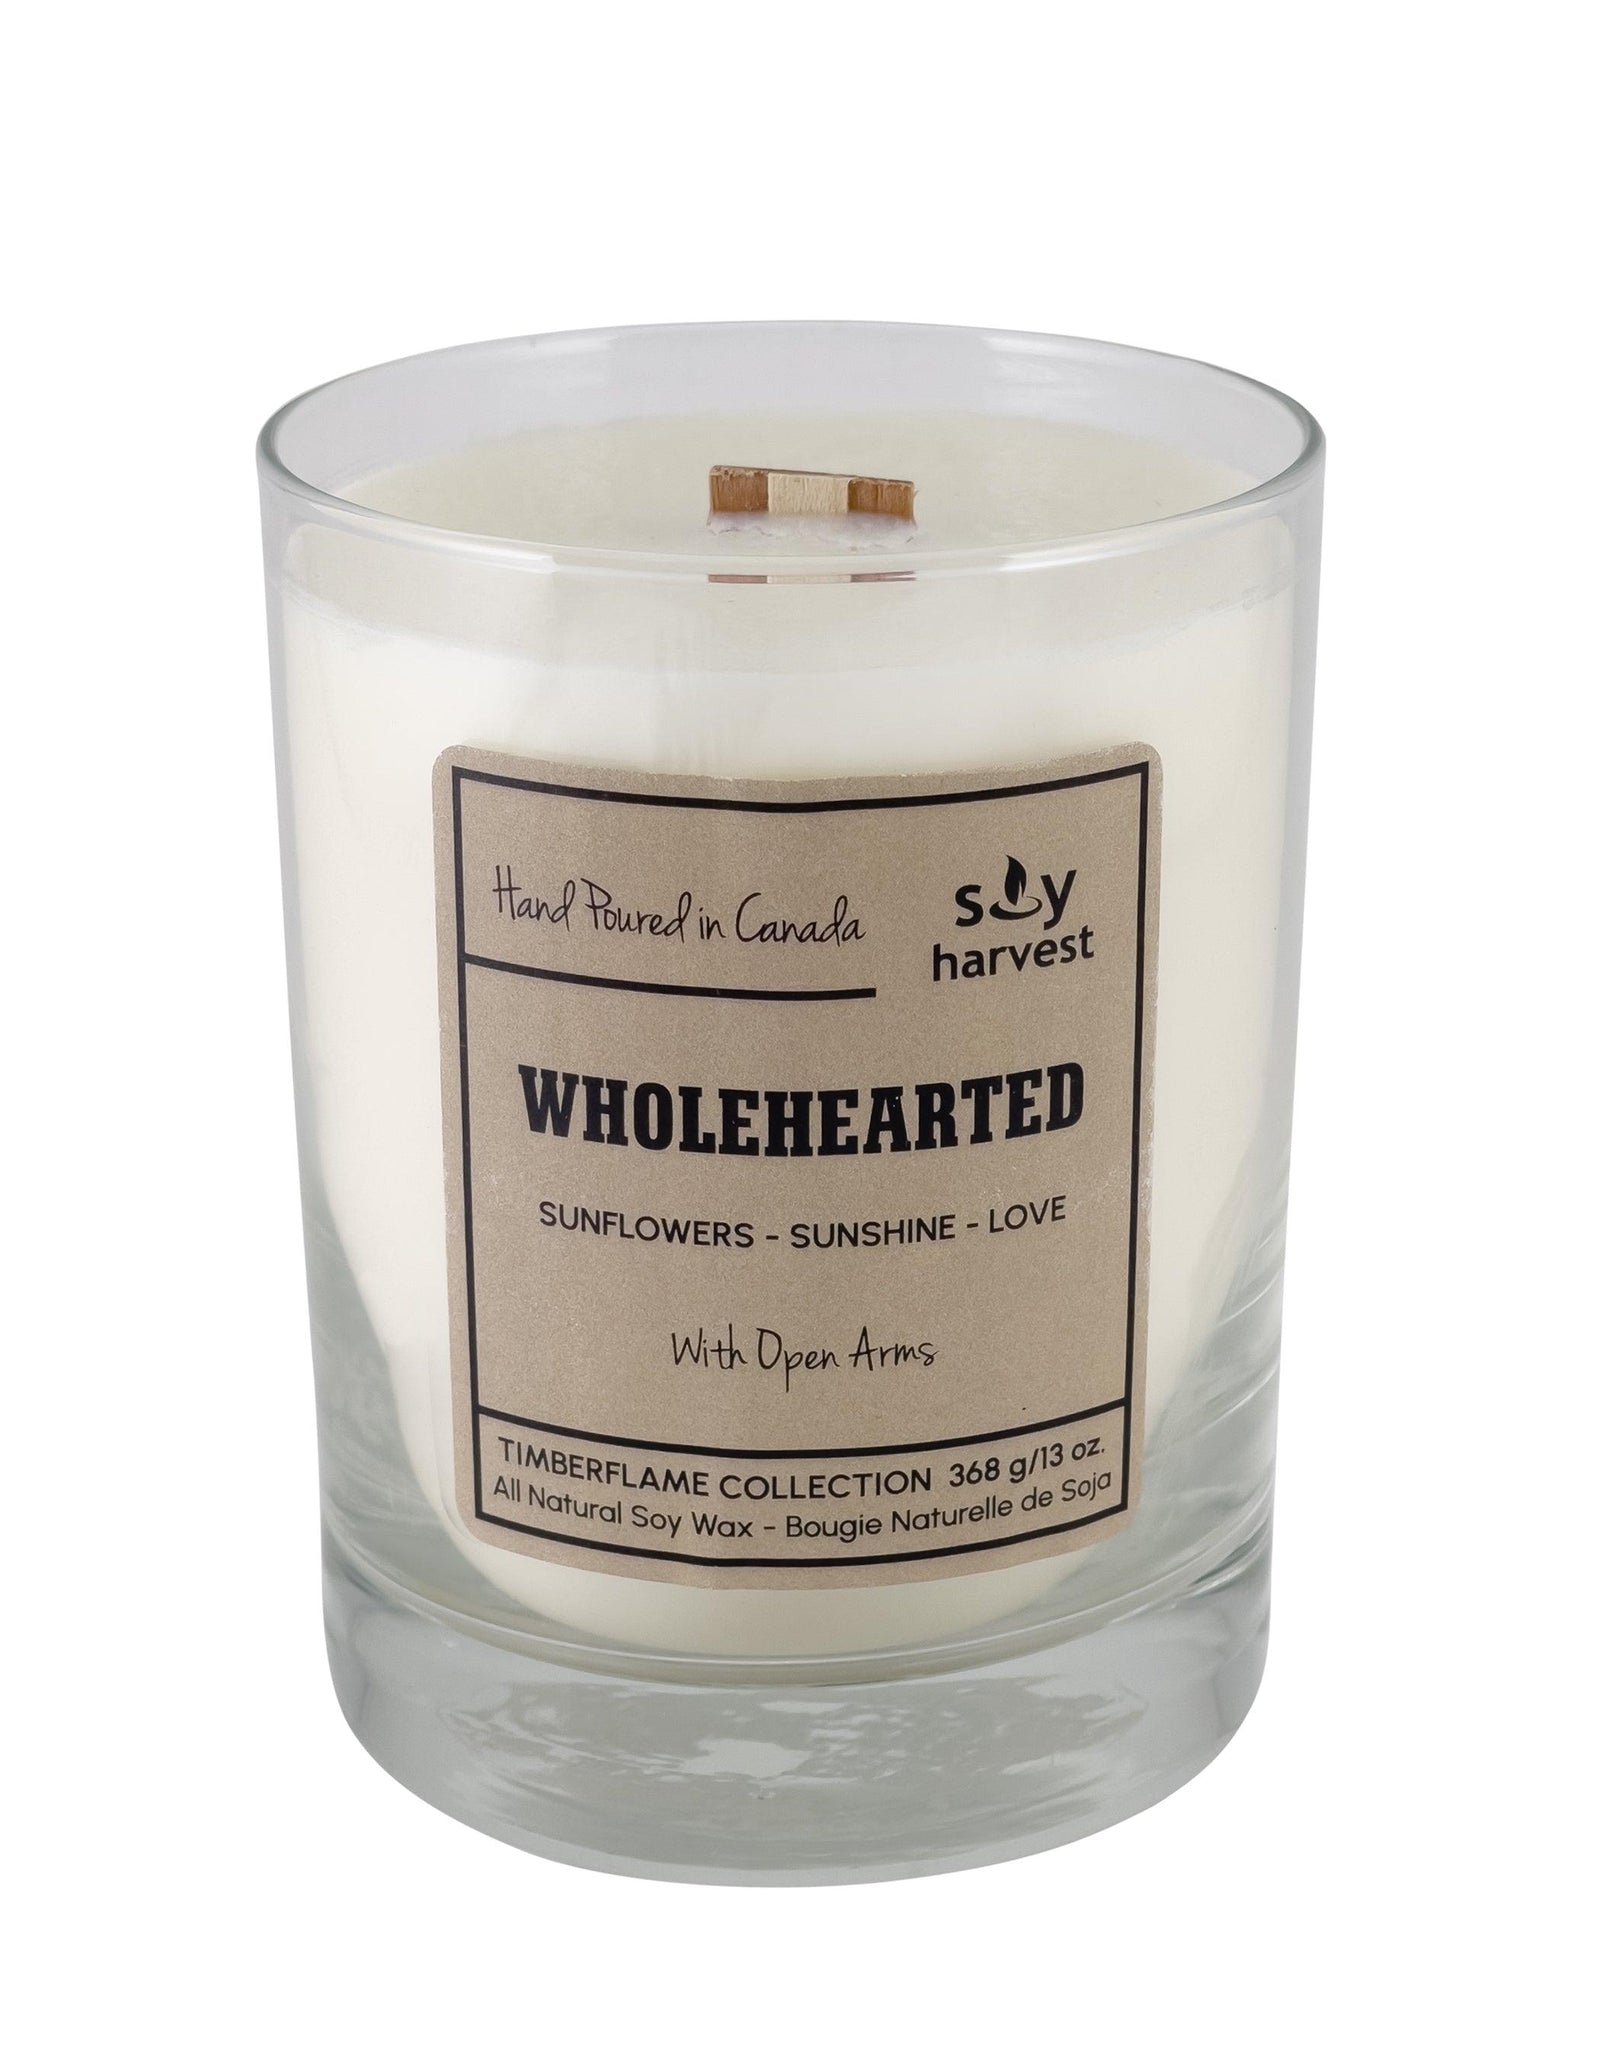 Wholehearted Soy Harvest Candle